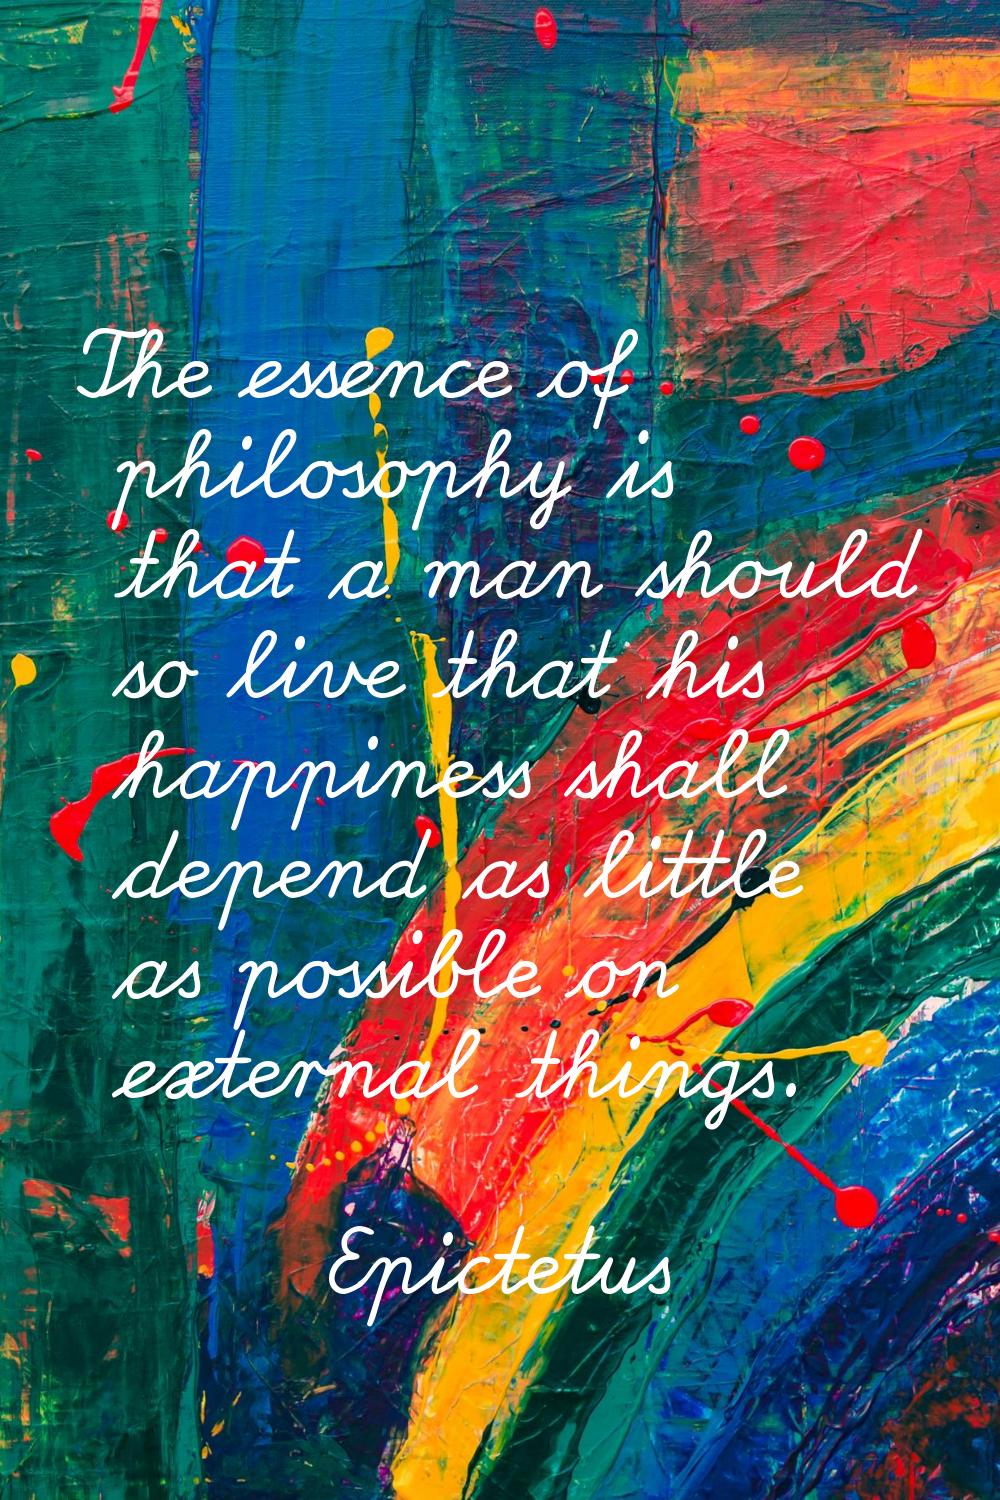 The essence of philosophy is that a man should so live that his happiness shall depend as little as